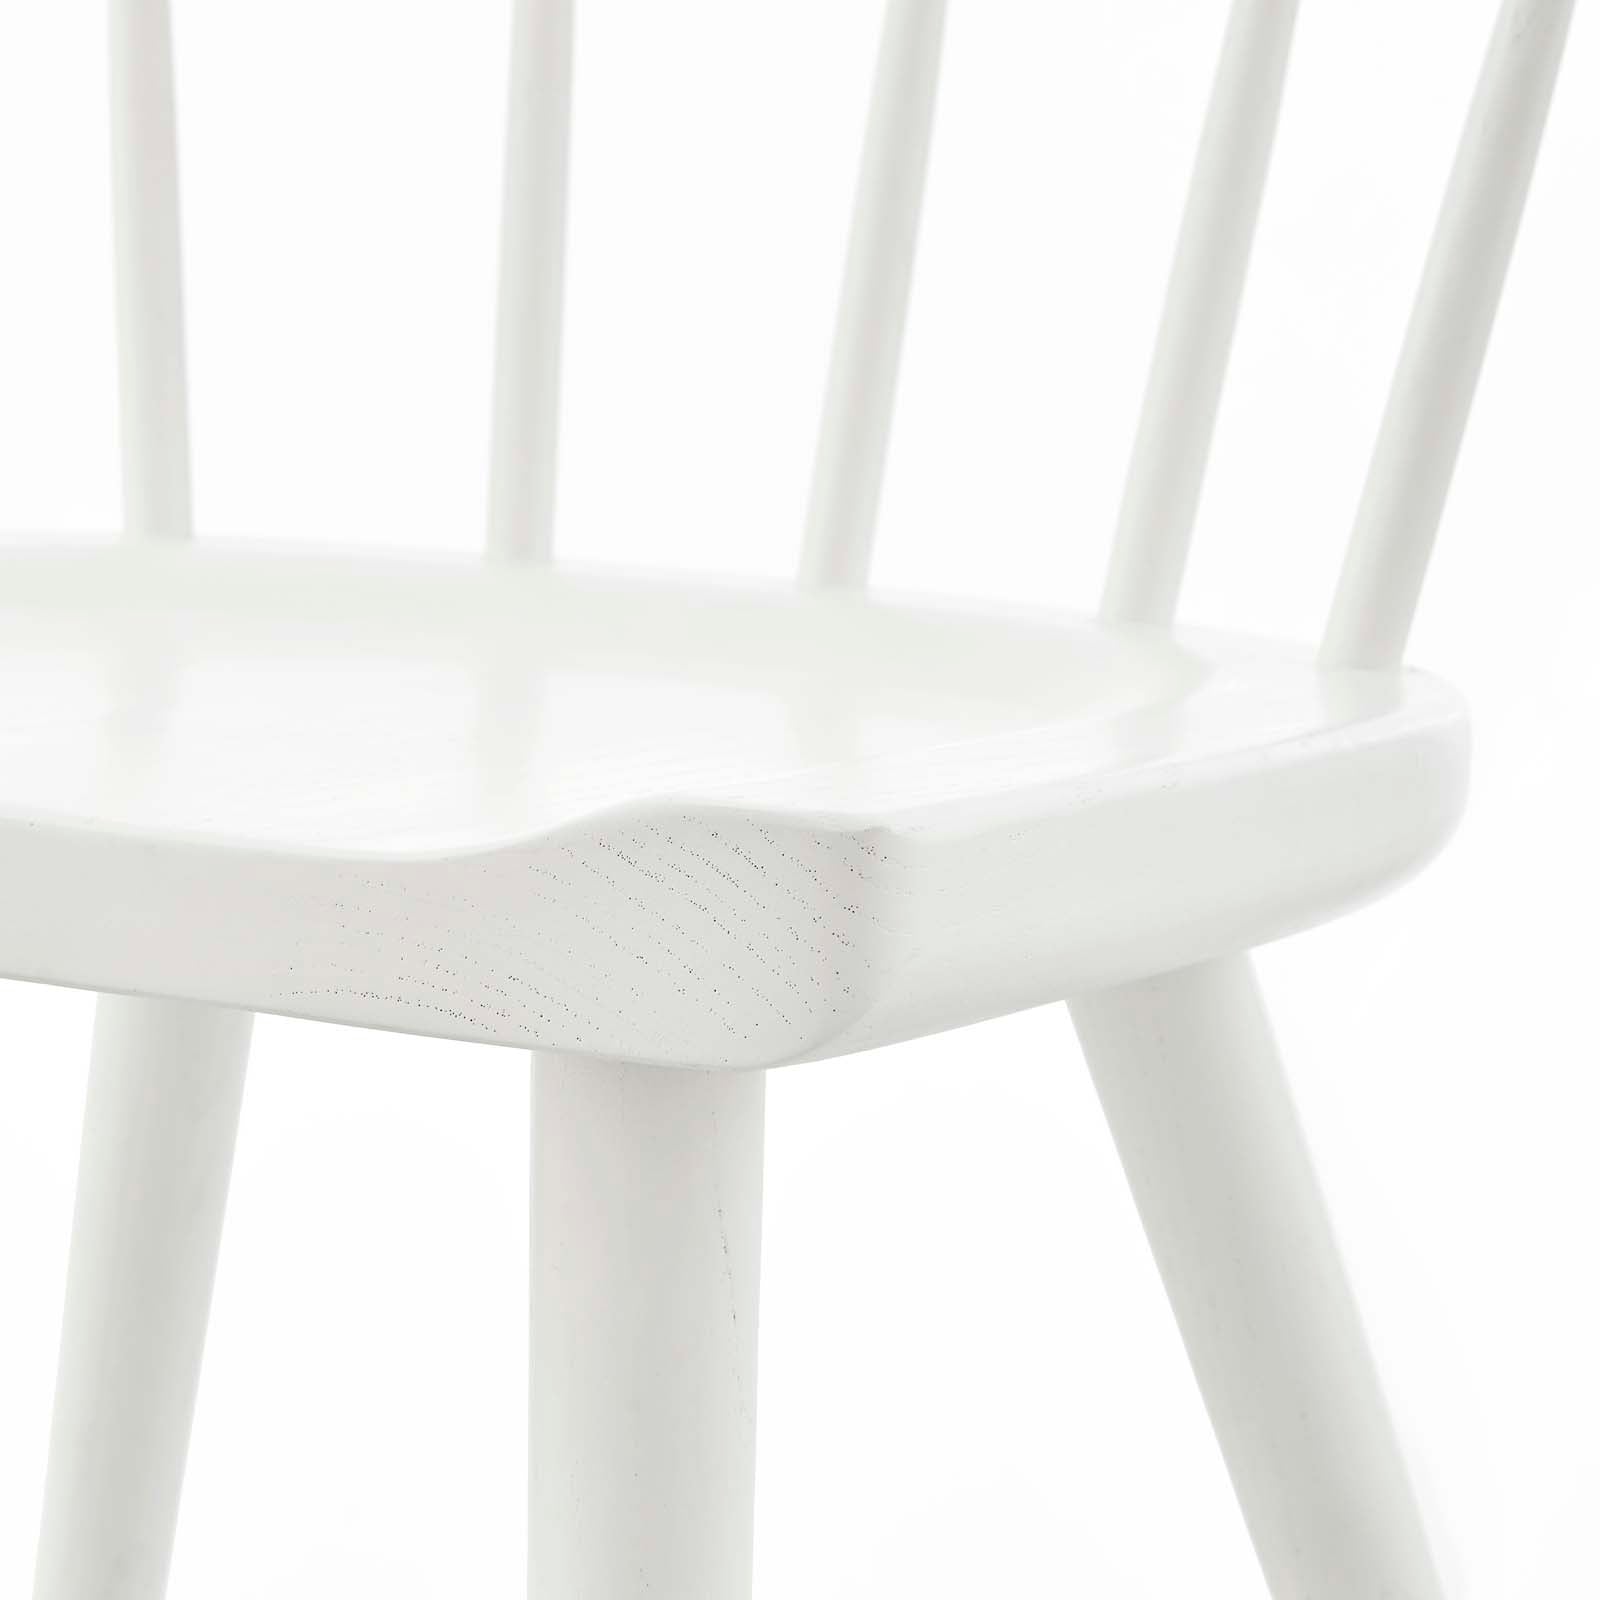 Modway Dining Chairs - Sutter Wood Dining Side Chair White